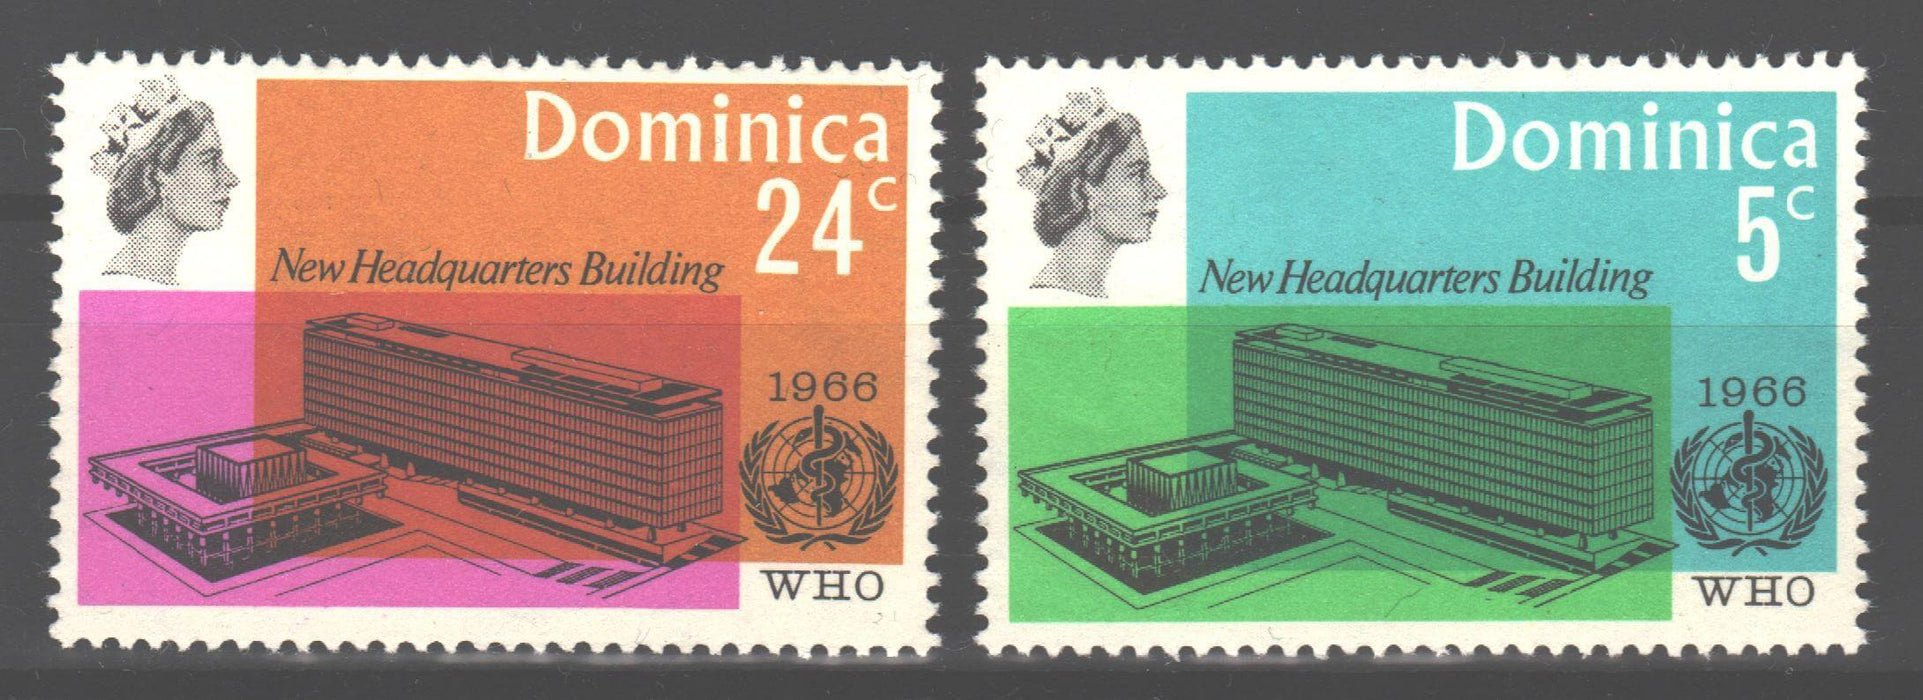 Dominica 1966 WHO Headquarters Issue Scott #197-198 c.v. 0.75$ - (TIP A) in Stamps Mall